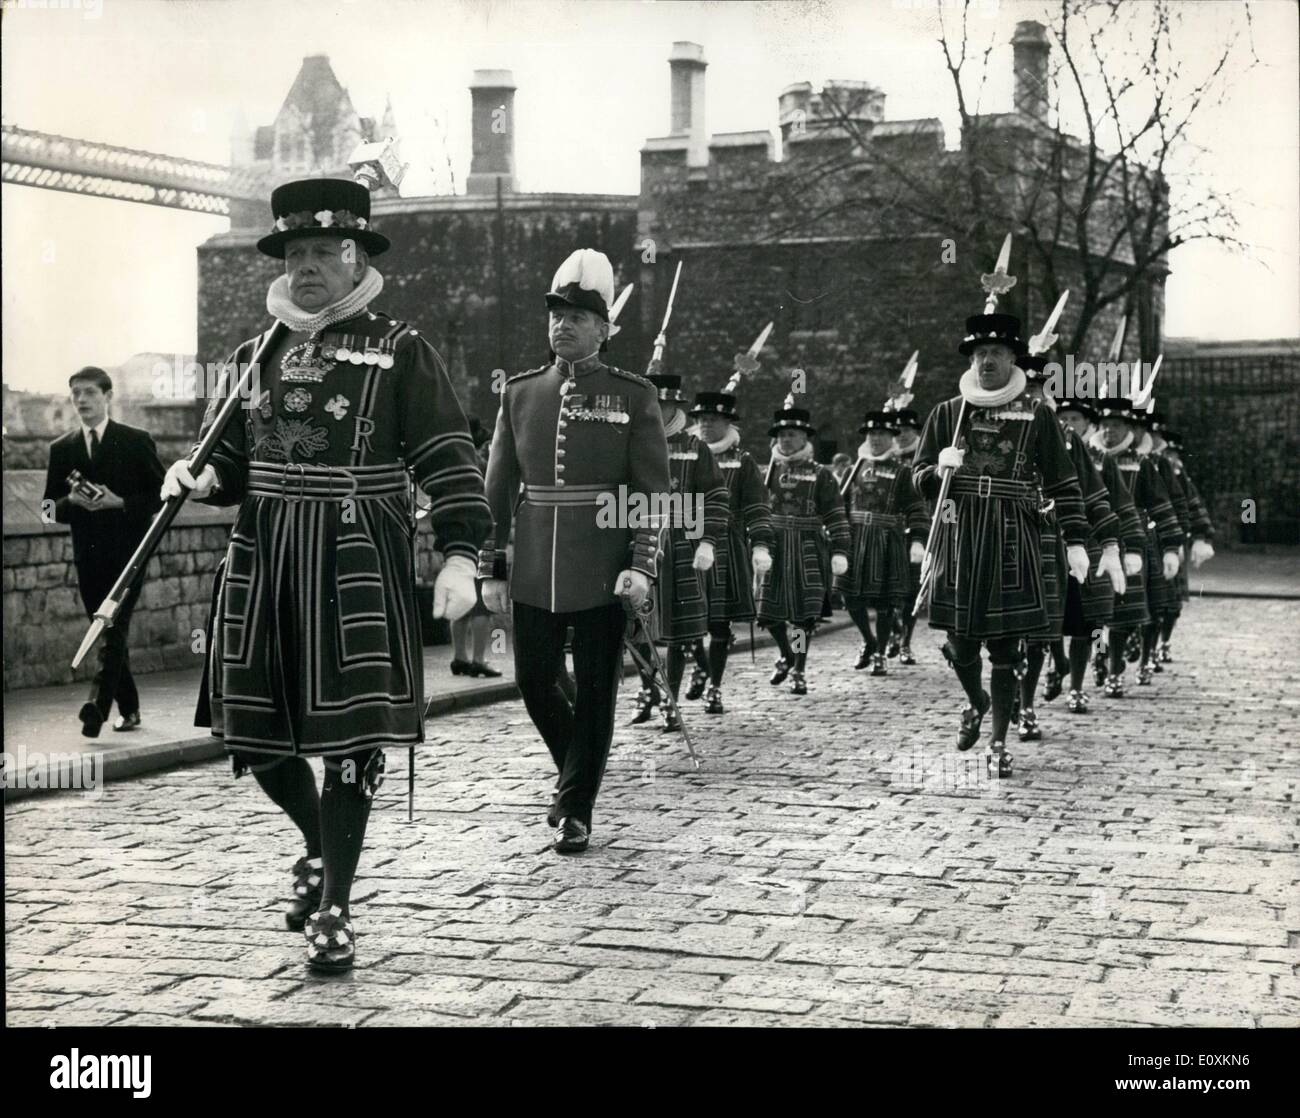 Mar. 03, 1967 - Easter day parade at the tower. The Easter day parade took place today at the tower of London when yeoman warders were inspected by the resident governor, cel. Sir Thomas butler, prior to marching to the chapel royal of St. Peter ad vincula for the service. photo shows The chief yeoman. warder G. Arnold. and the resident governor, col. Sir Thomas Butler, head the yeoman warders as they march to the chapel at the tower today. Stock Photo